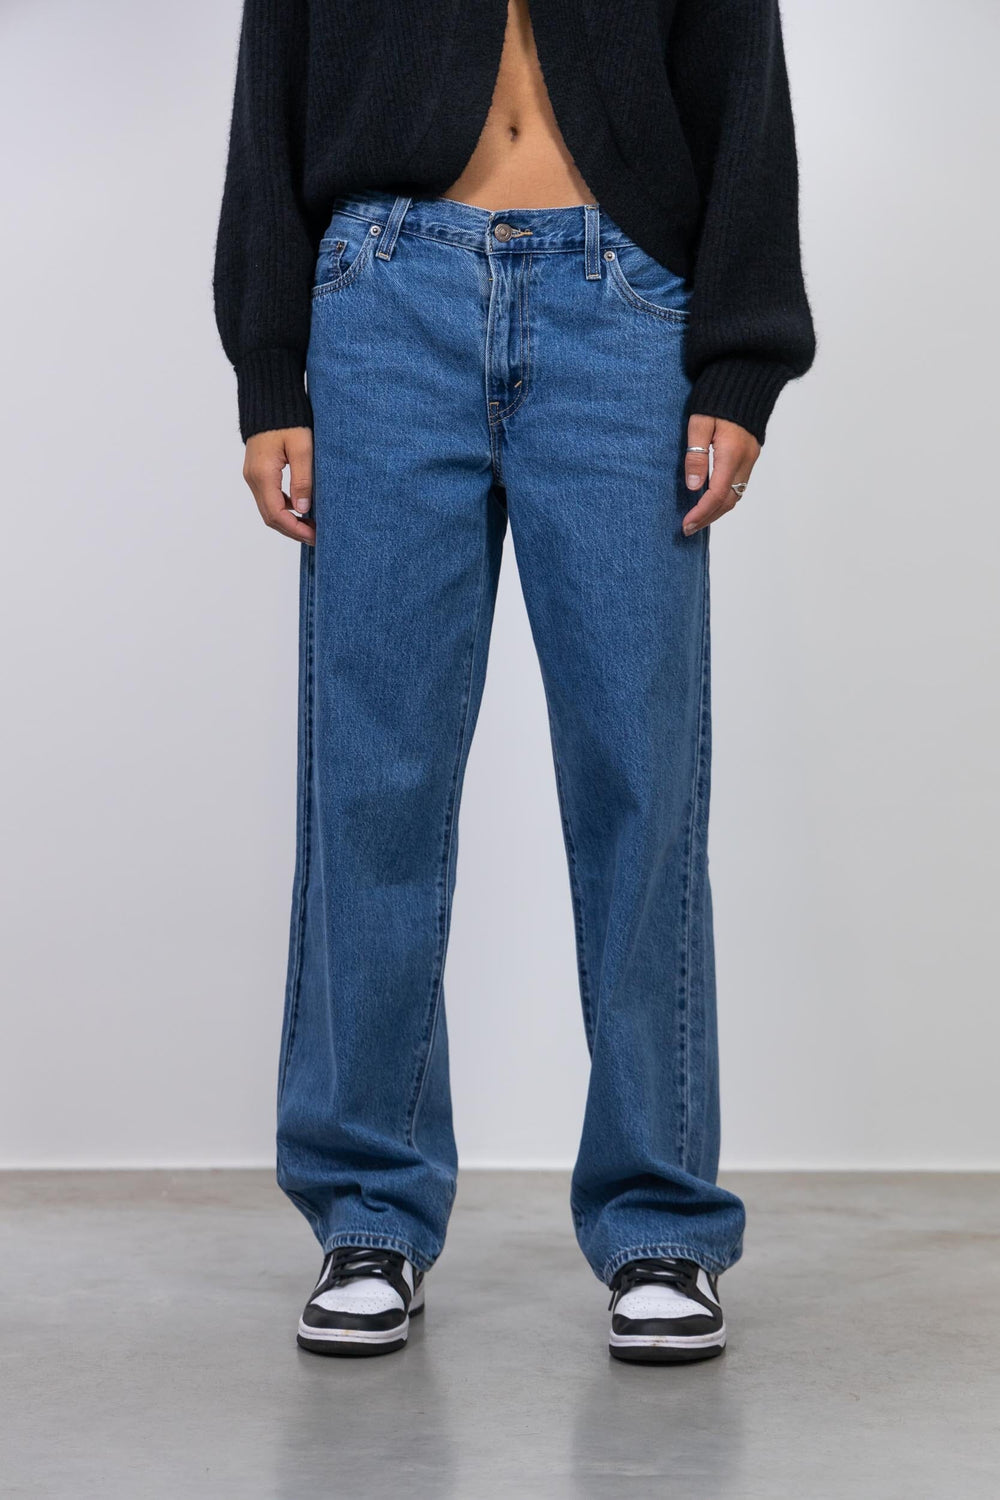 BAGGY DAD RELAXED FIT JEANS IN DARK BLUE JEANS LEVIS 